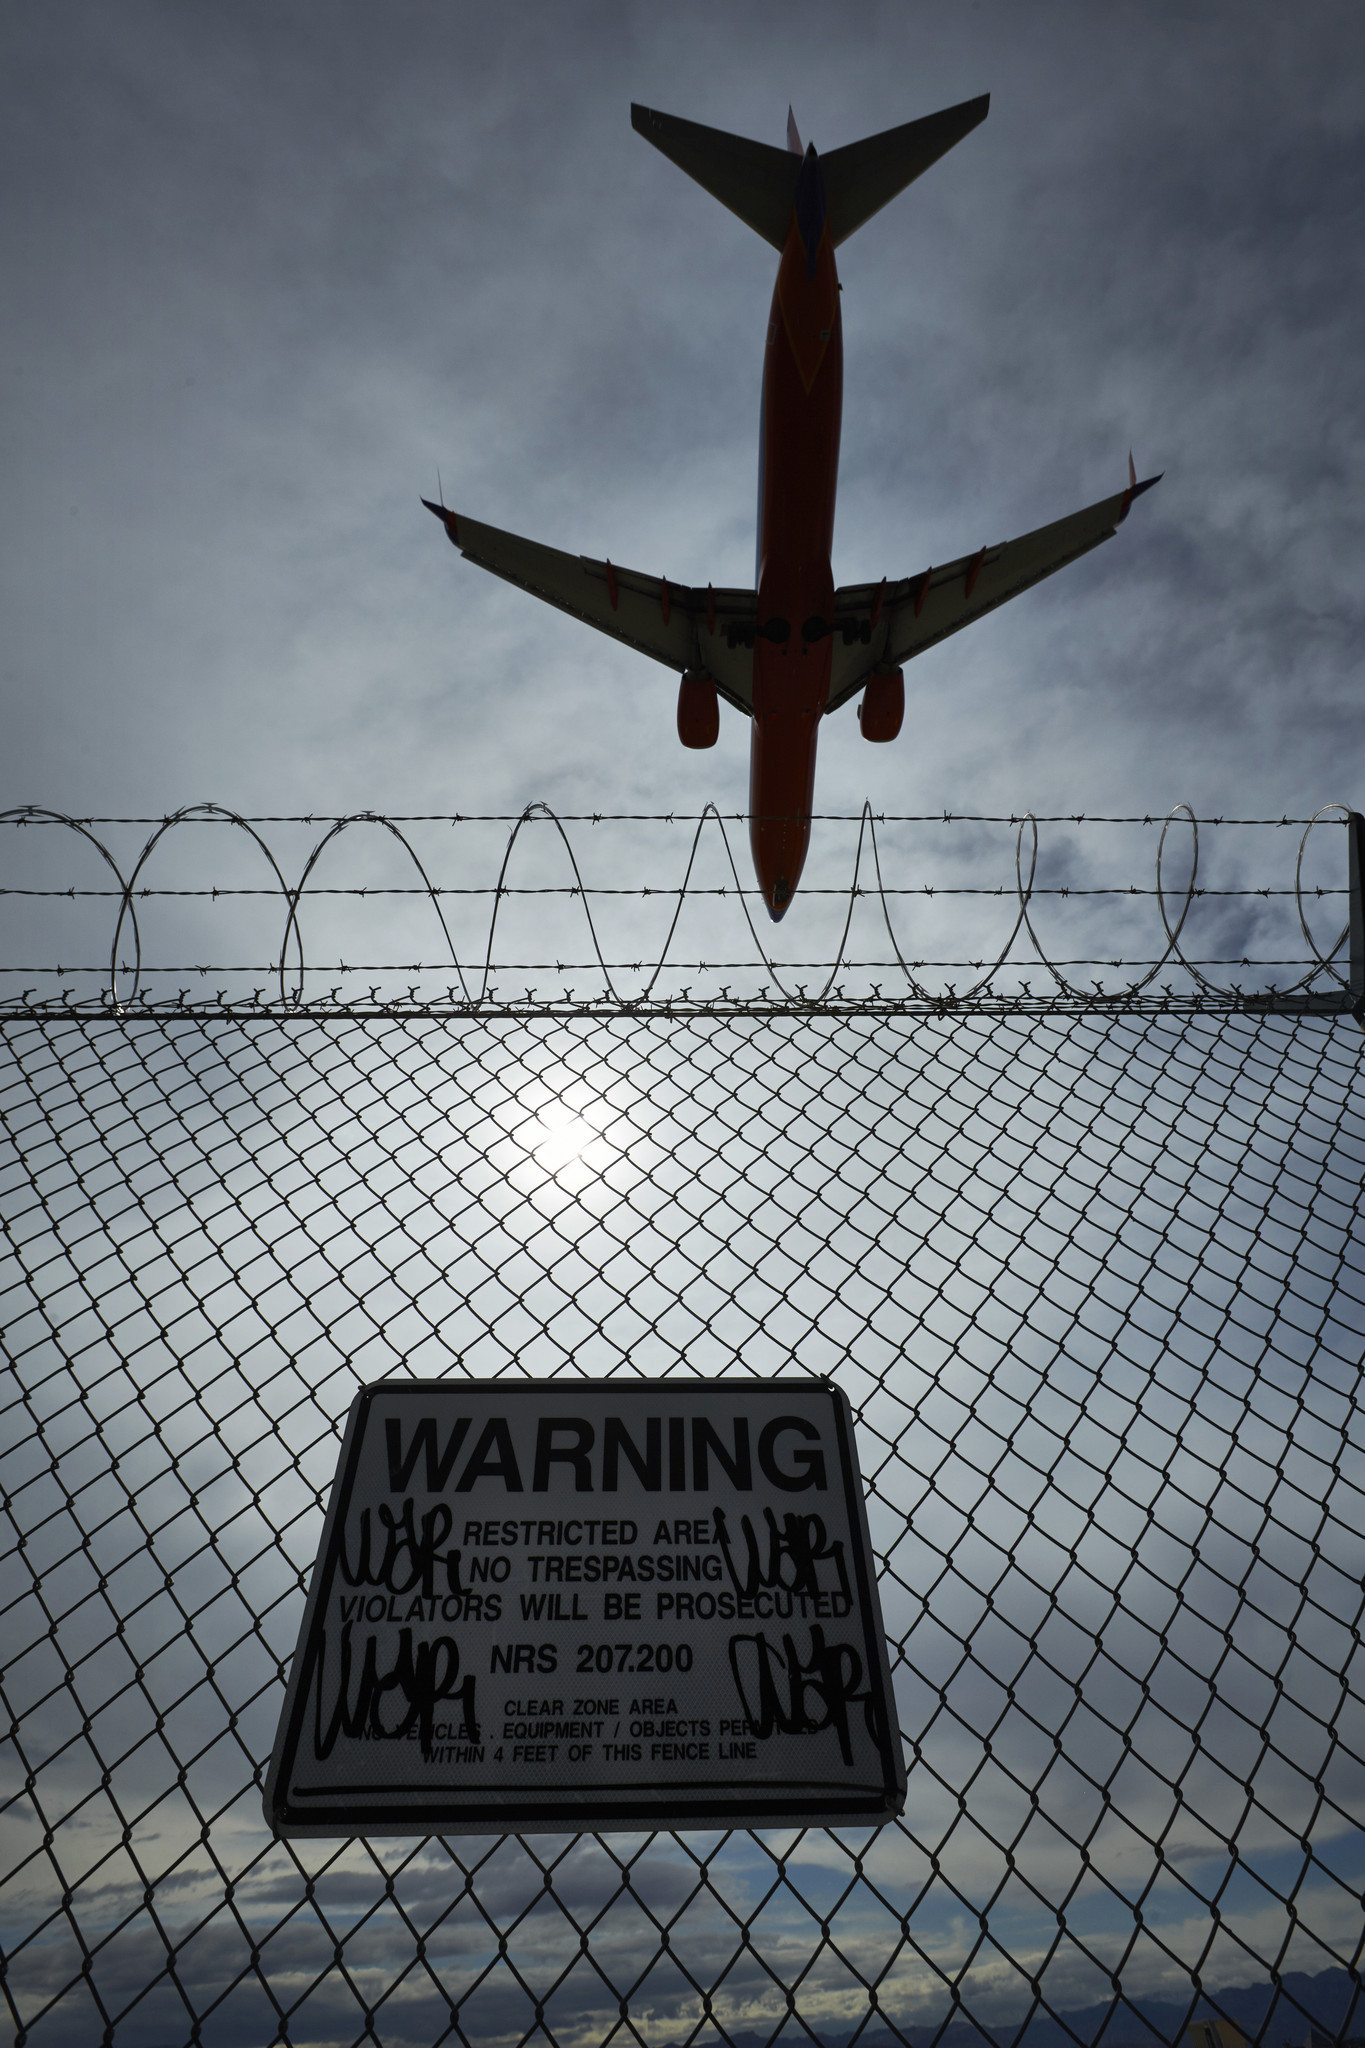 Intruders breach U.S. airport fences about every 10 days - Chicago Tribune